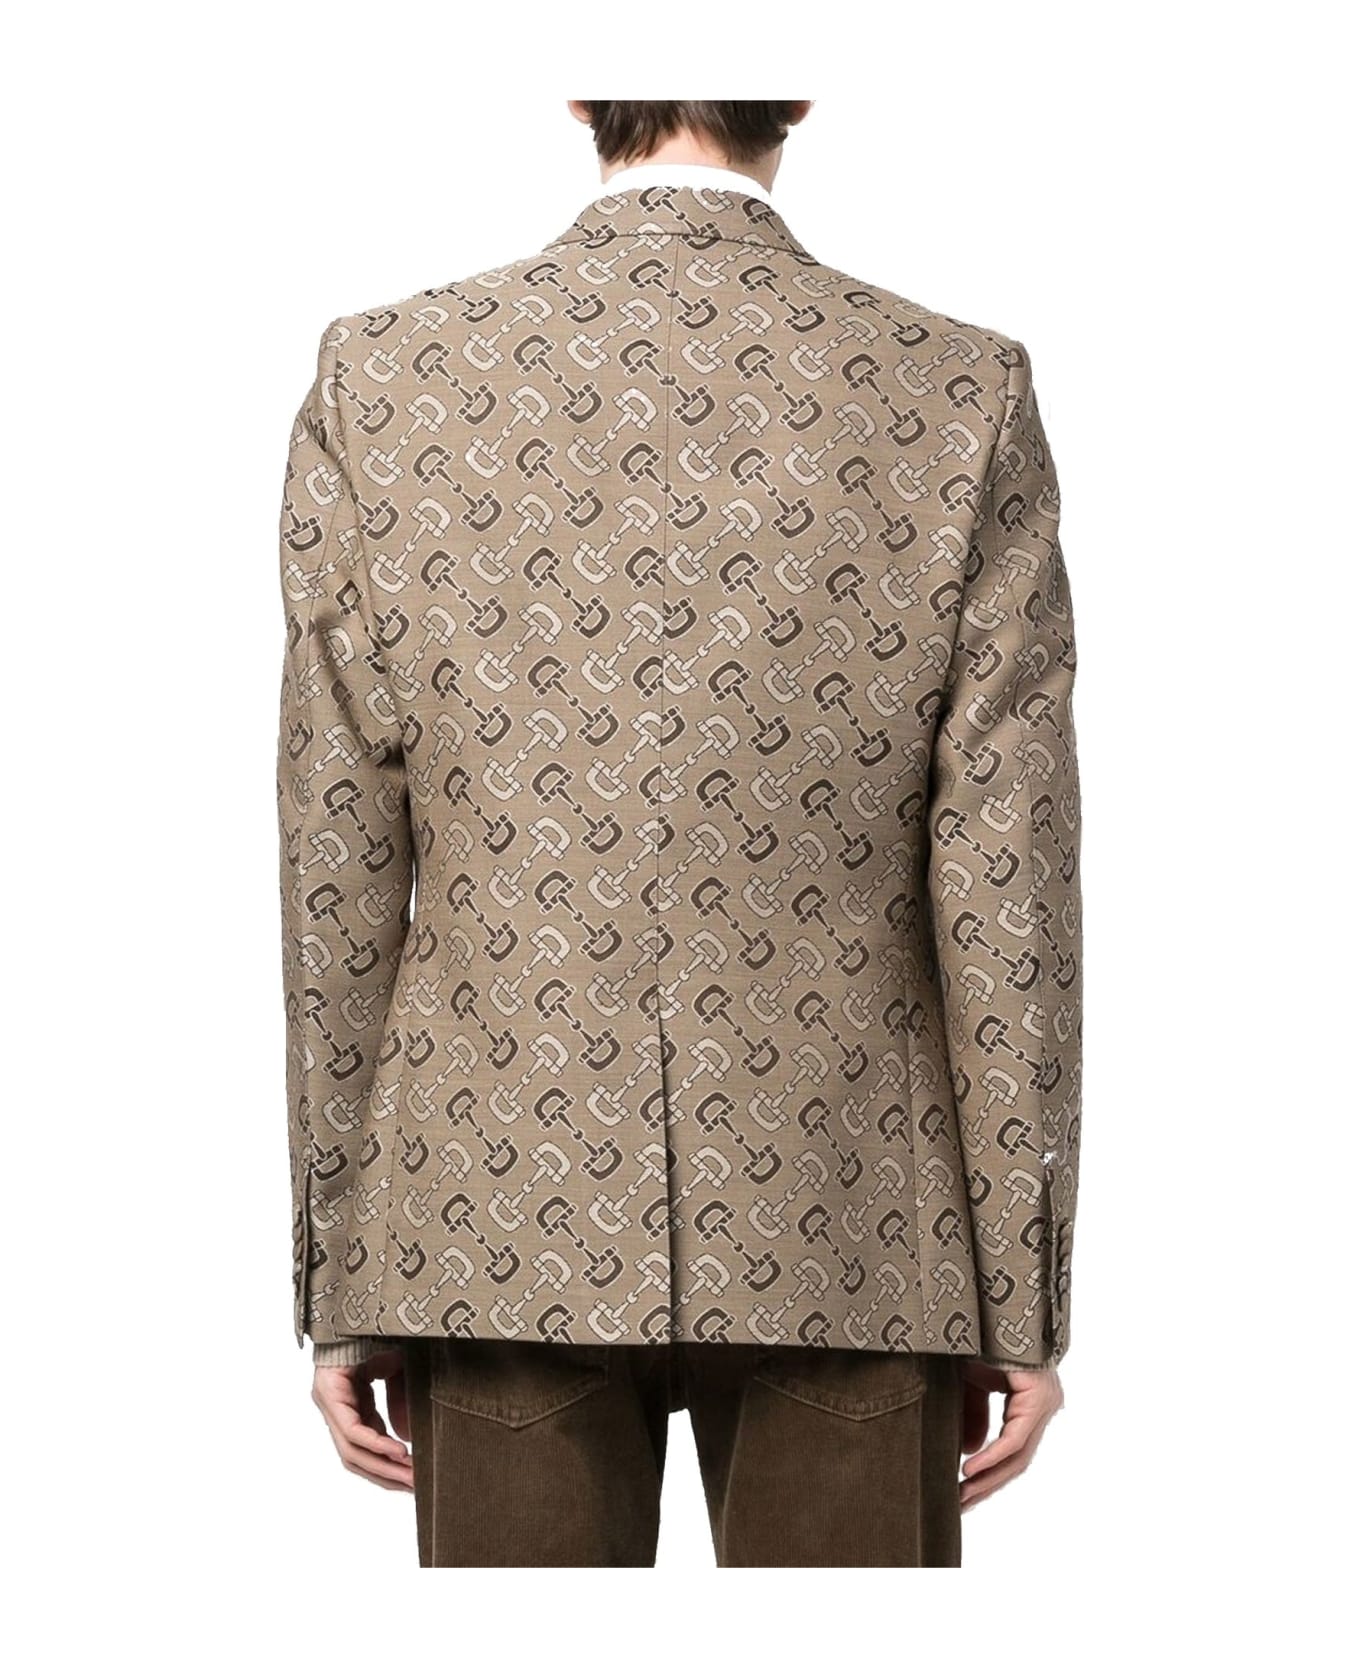 Gucci Cotton And Wool Jacket - Beige